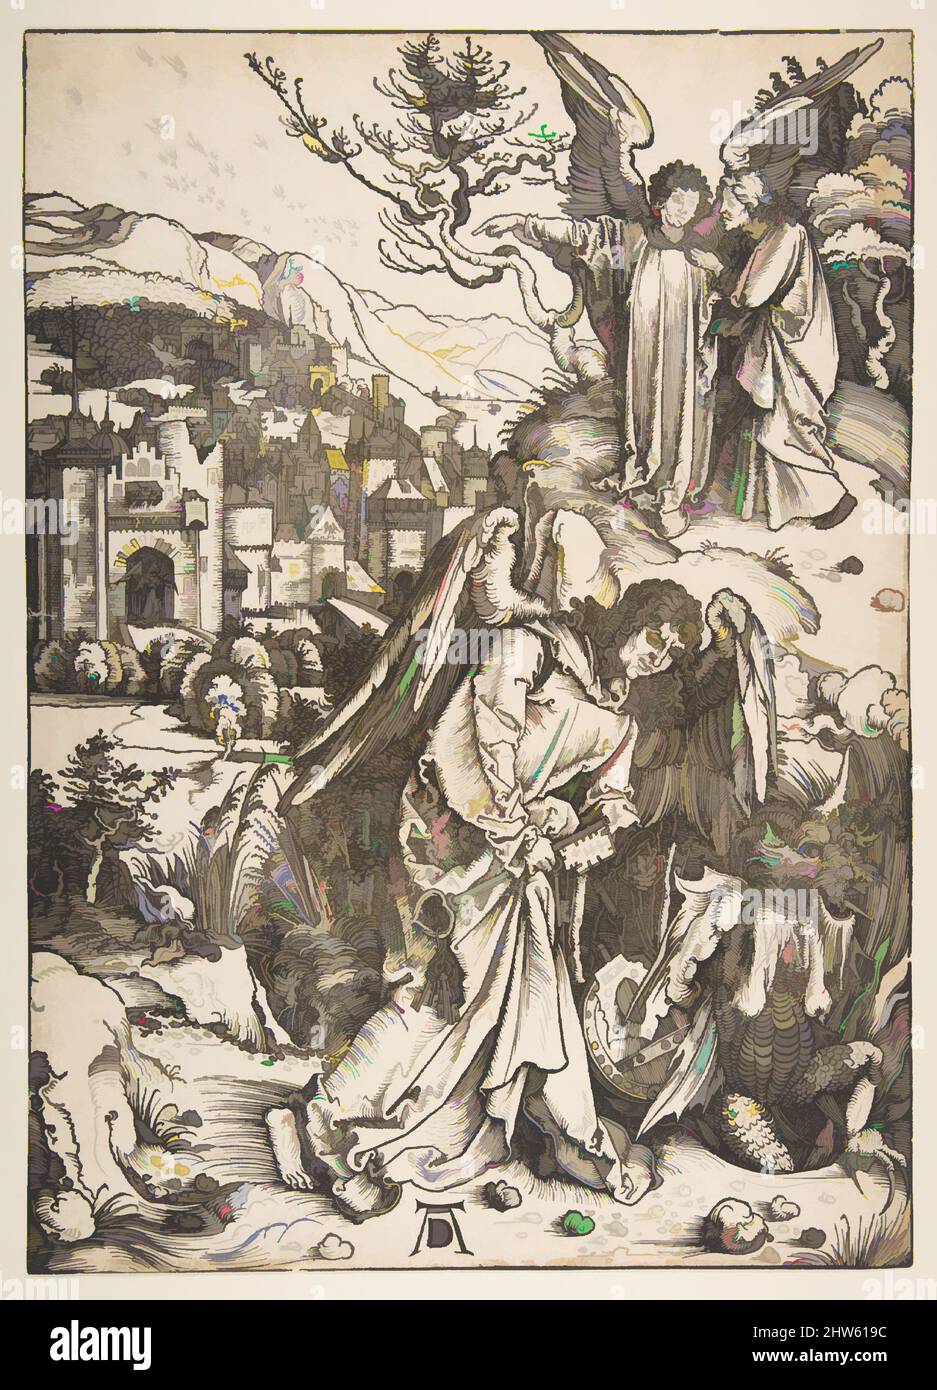 Art inspired by The Angel with the Key to the Bottomless Pit, ca. 1498, Woodcut, sheet: 15 3/8 x 11 in. (39.1 x 28 cm) trimmed to block line, Prints, Albrecht Dürer (German, Nuremberg 1471–1528 Nuremberg, Classic works modernized by Artotop with a splash of modernity. Shapes, color and value, eye-catching visual impact on art. Emotions through freedom of artworks in a contemporary way. A timeless message pursuing a wildly creative new direction. Artists turning to the digital medium and creating the Artotop NFT Stock Photo